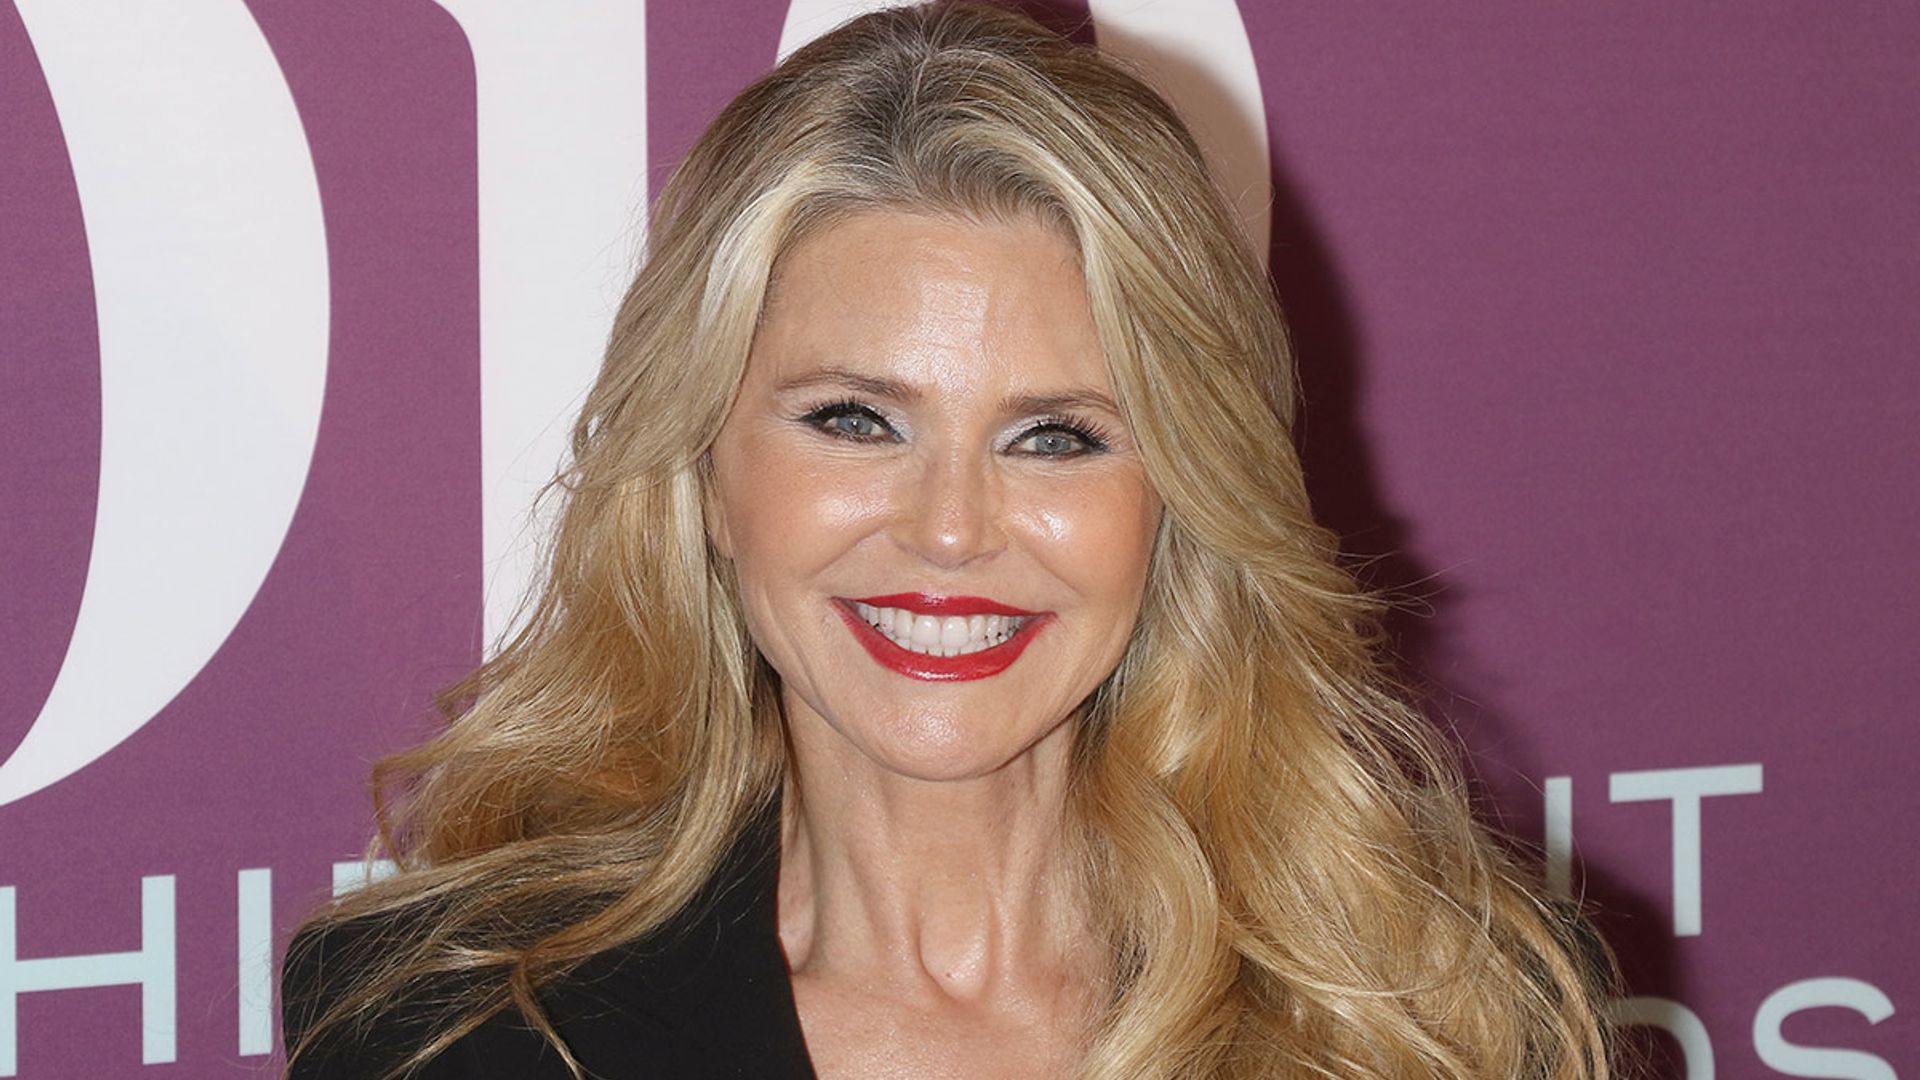 Christie Brinkley still looks so fashionable in this strange piece of clothing